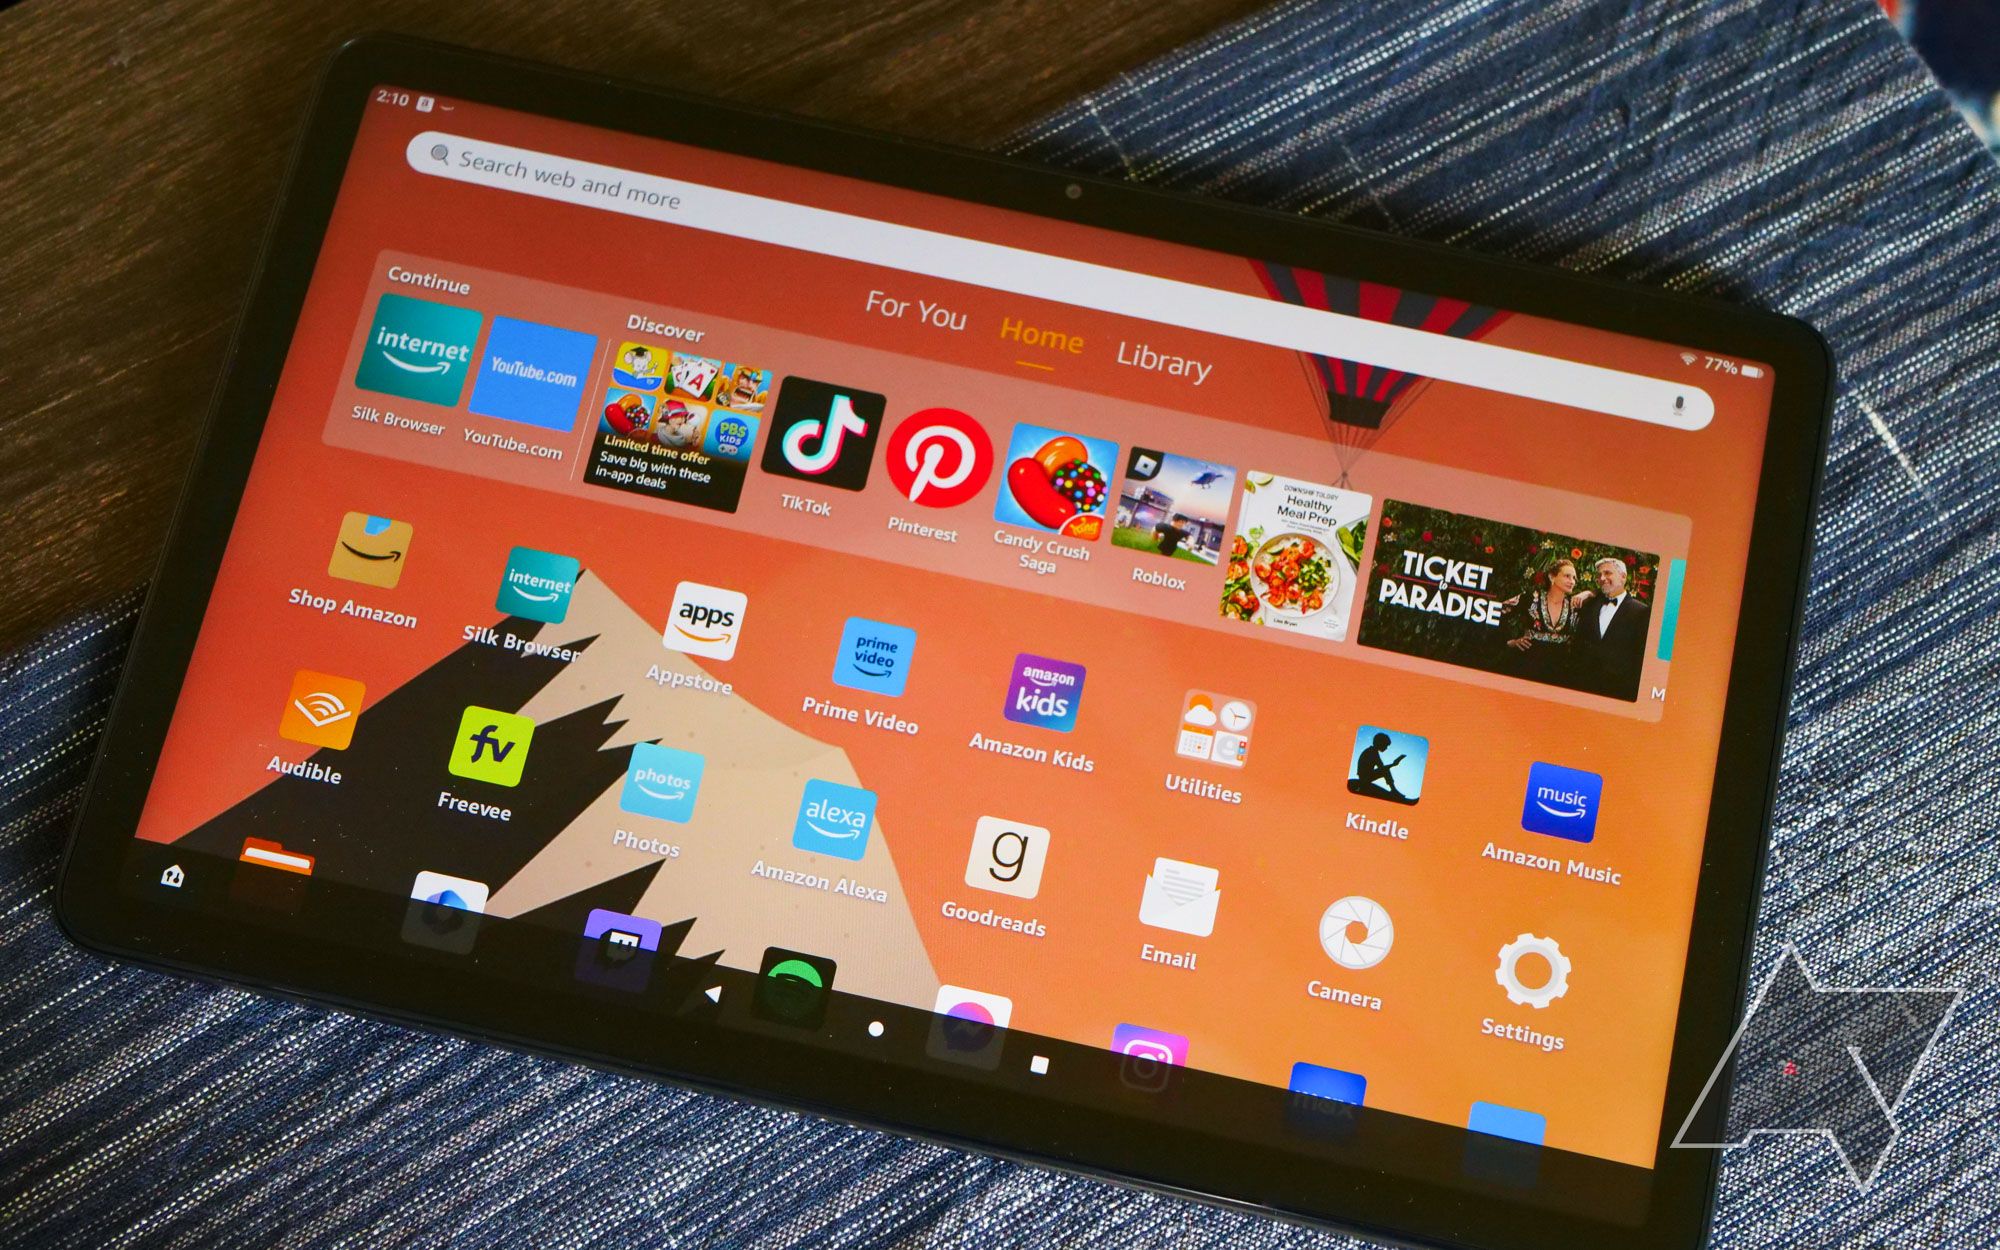 Fire Max 11 review: an Android tablet you should buy